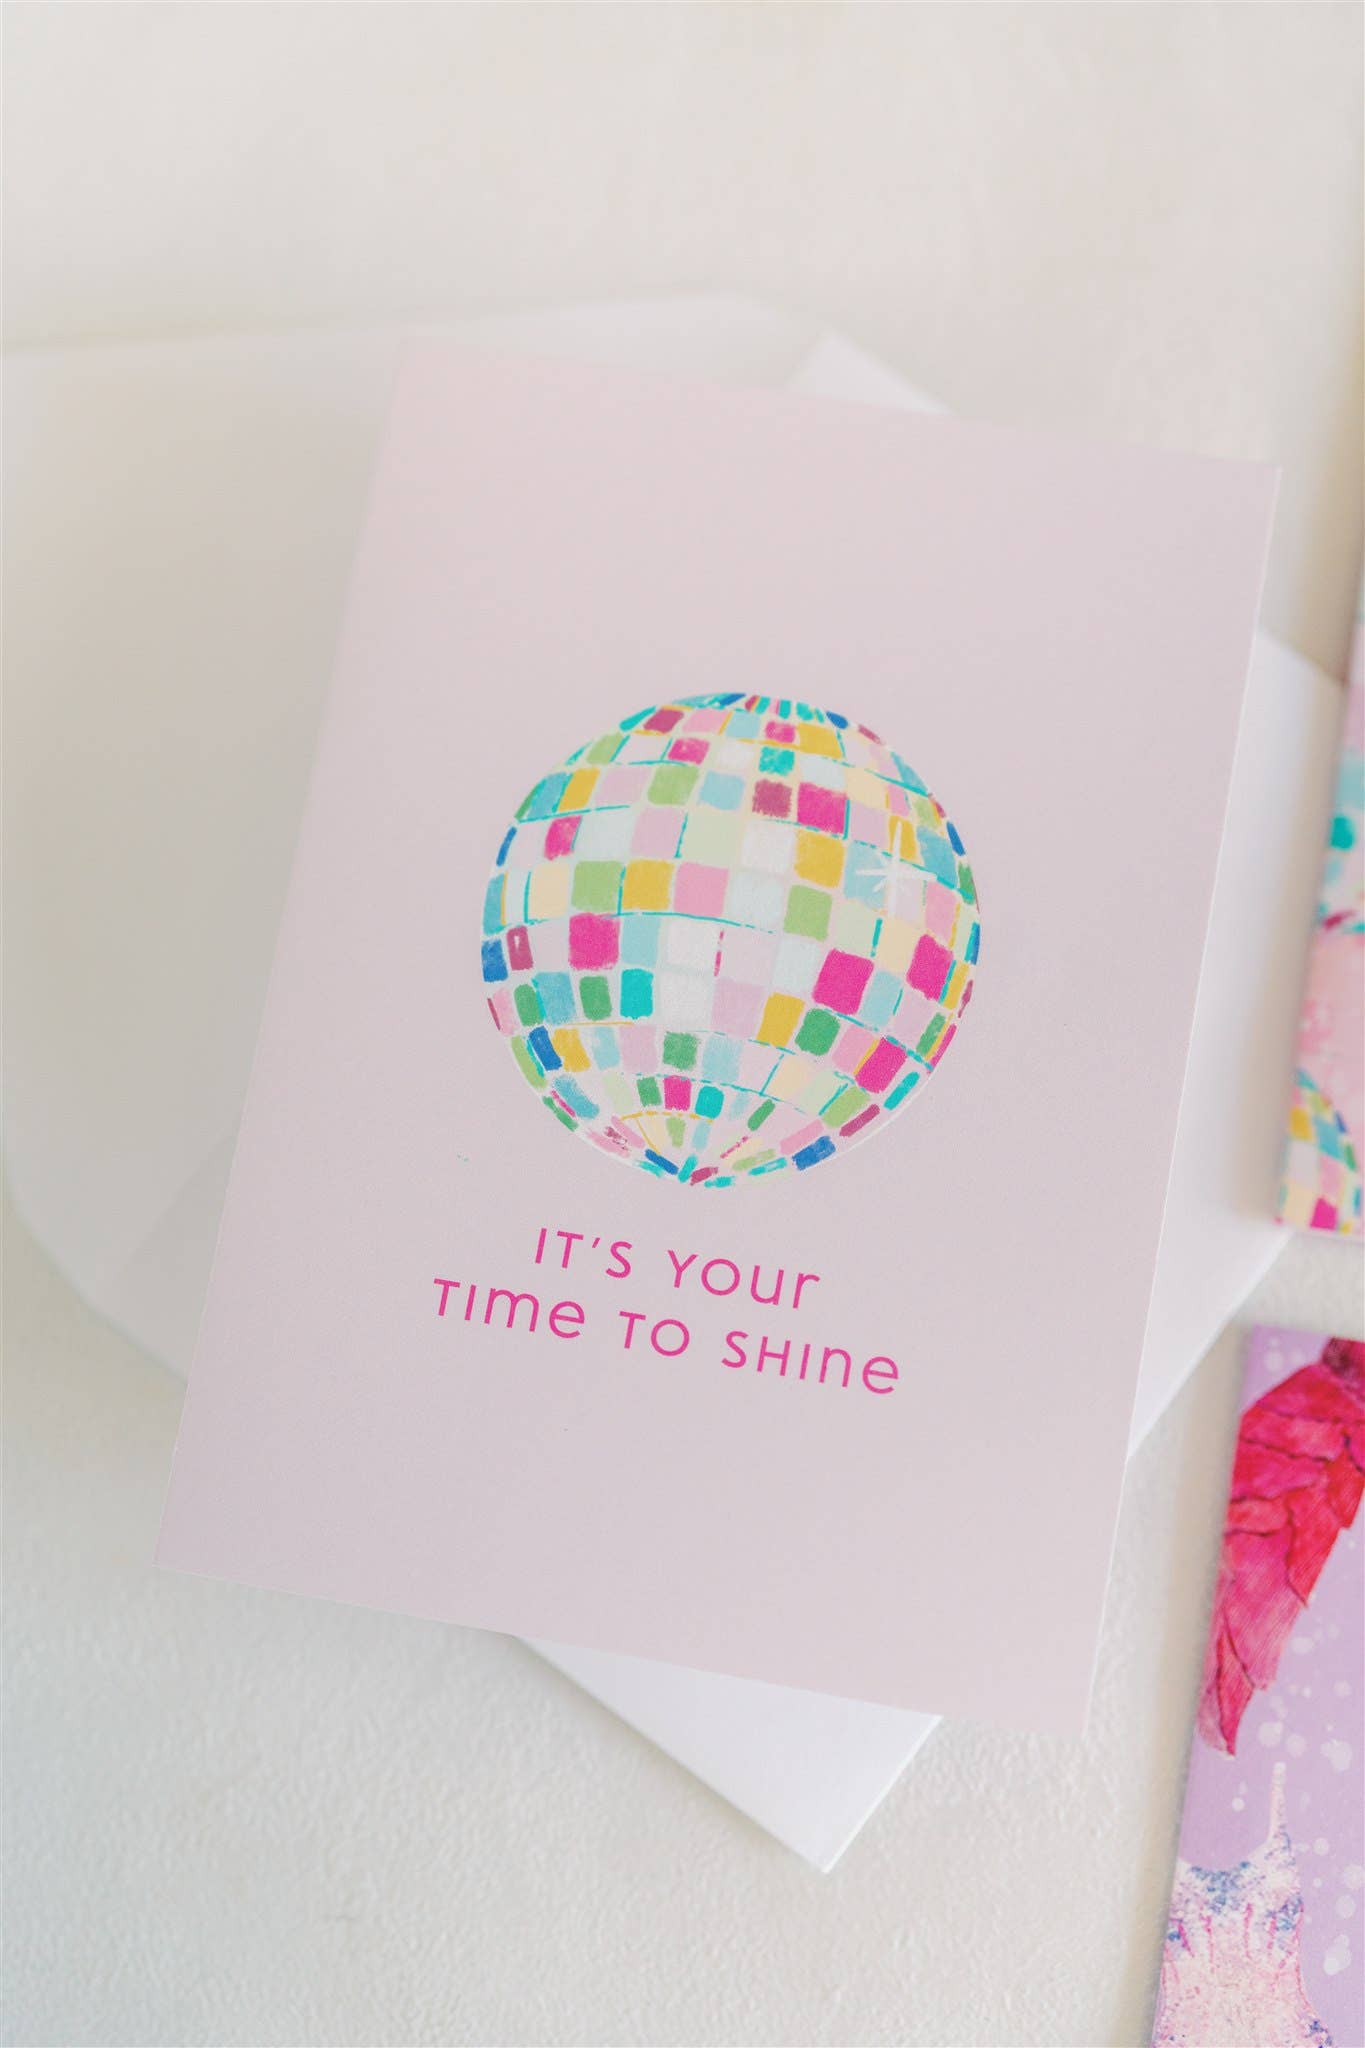 It's Your Time to Shine" Greeting Card